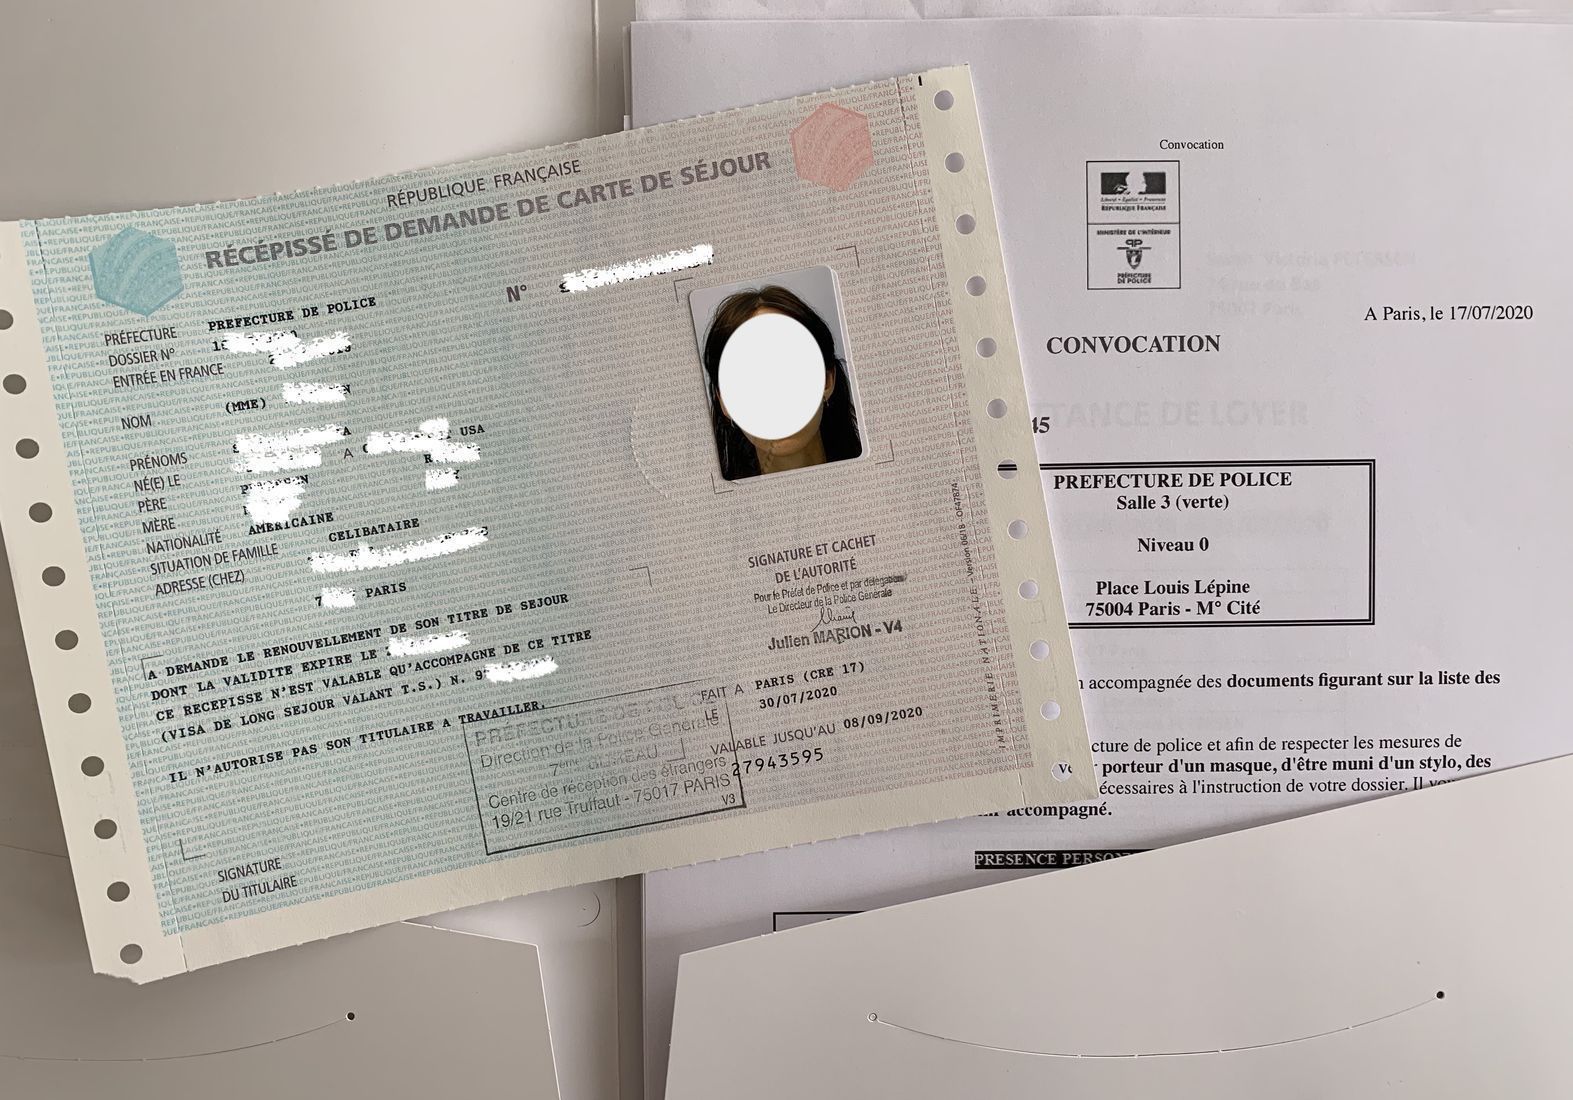 How to Get a Recipissée from the Paris Préfecture When Your French Visa Expires Before Your Renewal Appointment Date